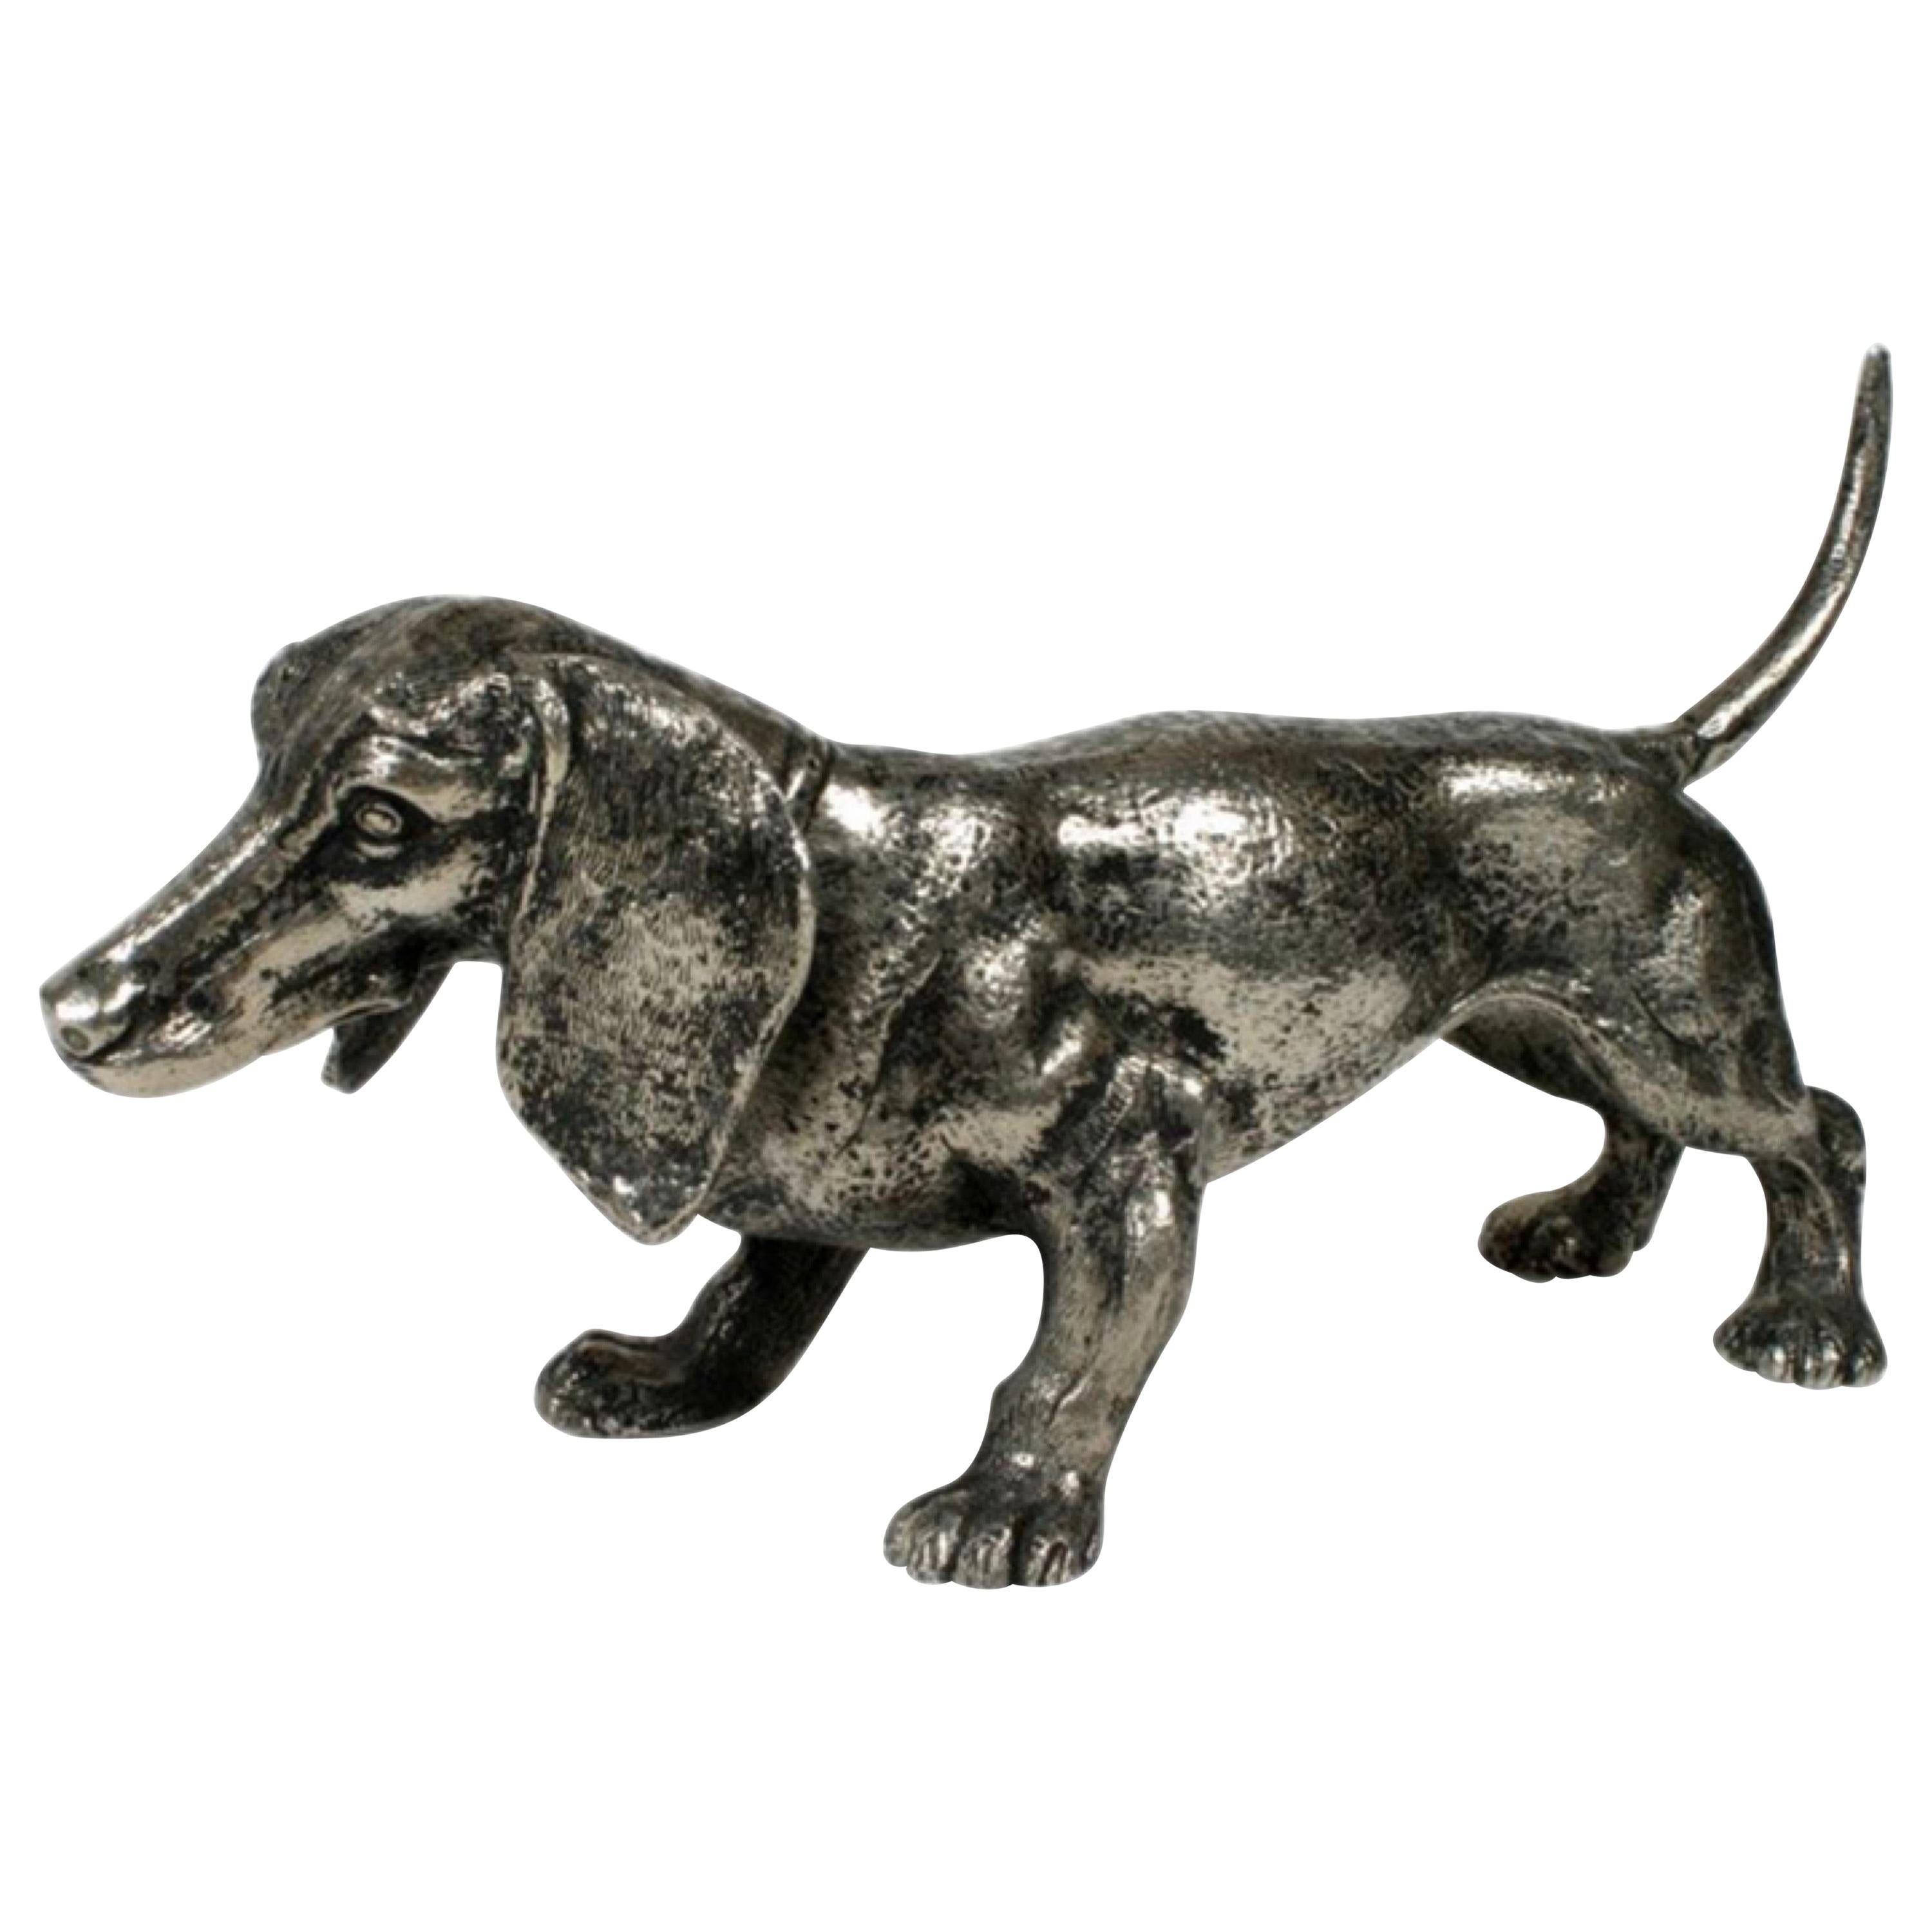 Vintage Gucci Silver-Plated Dachshund Dog Table Sculpture, circa 1970